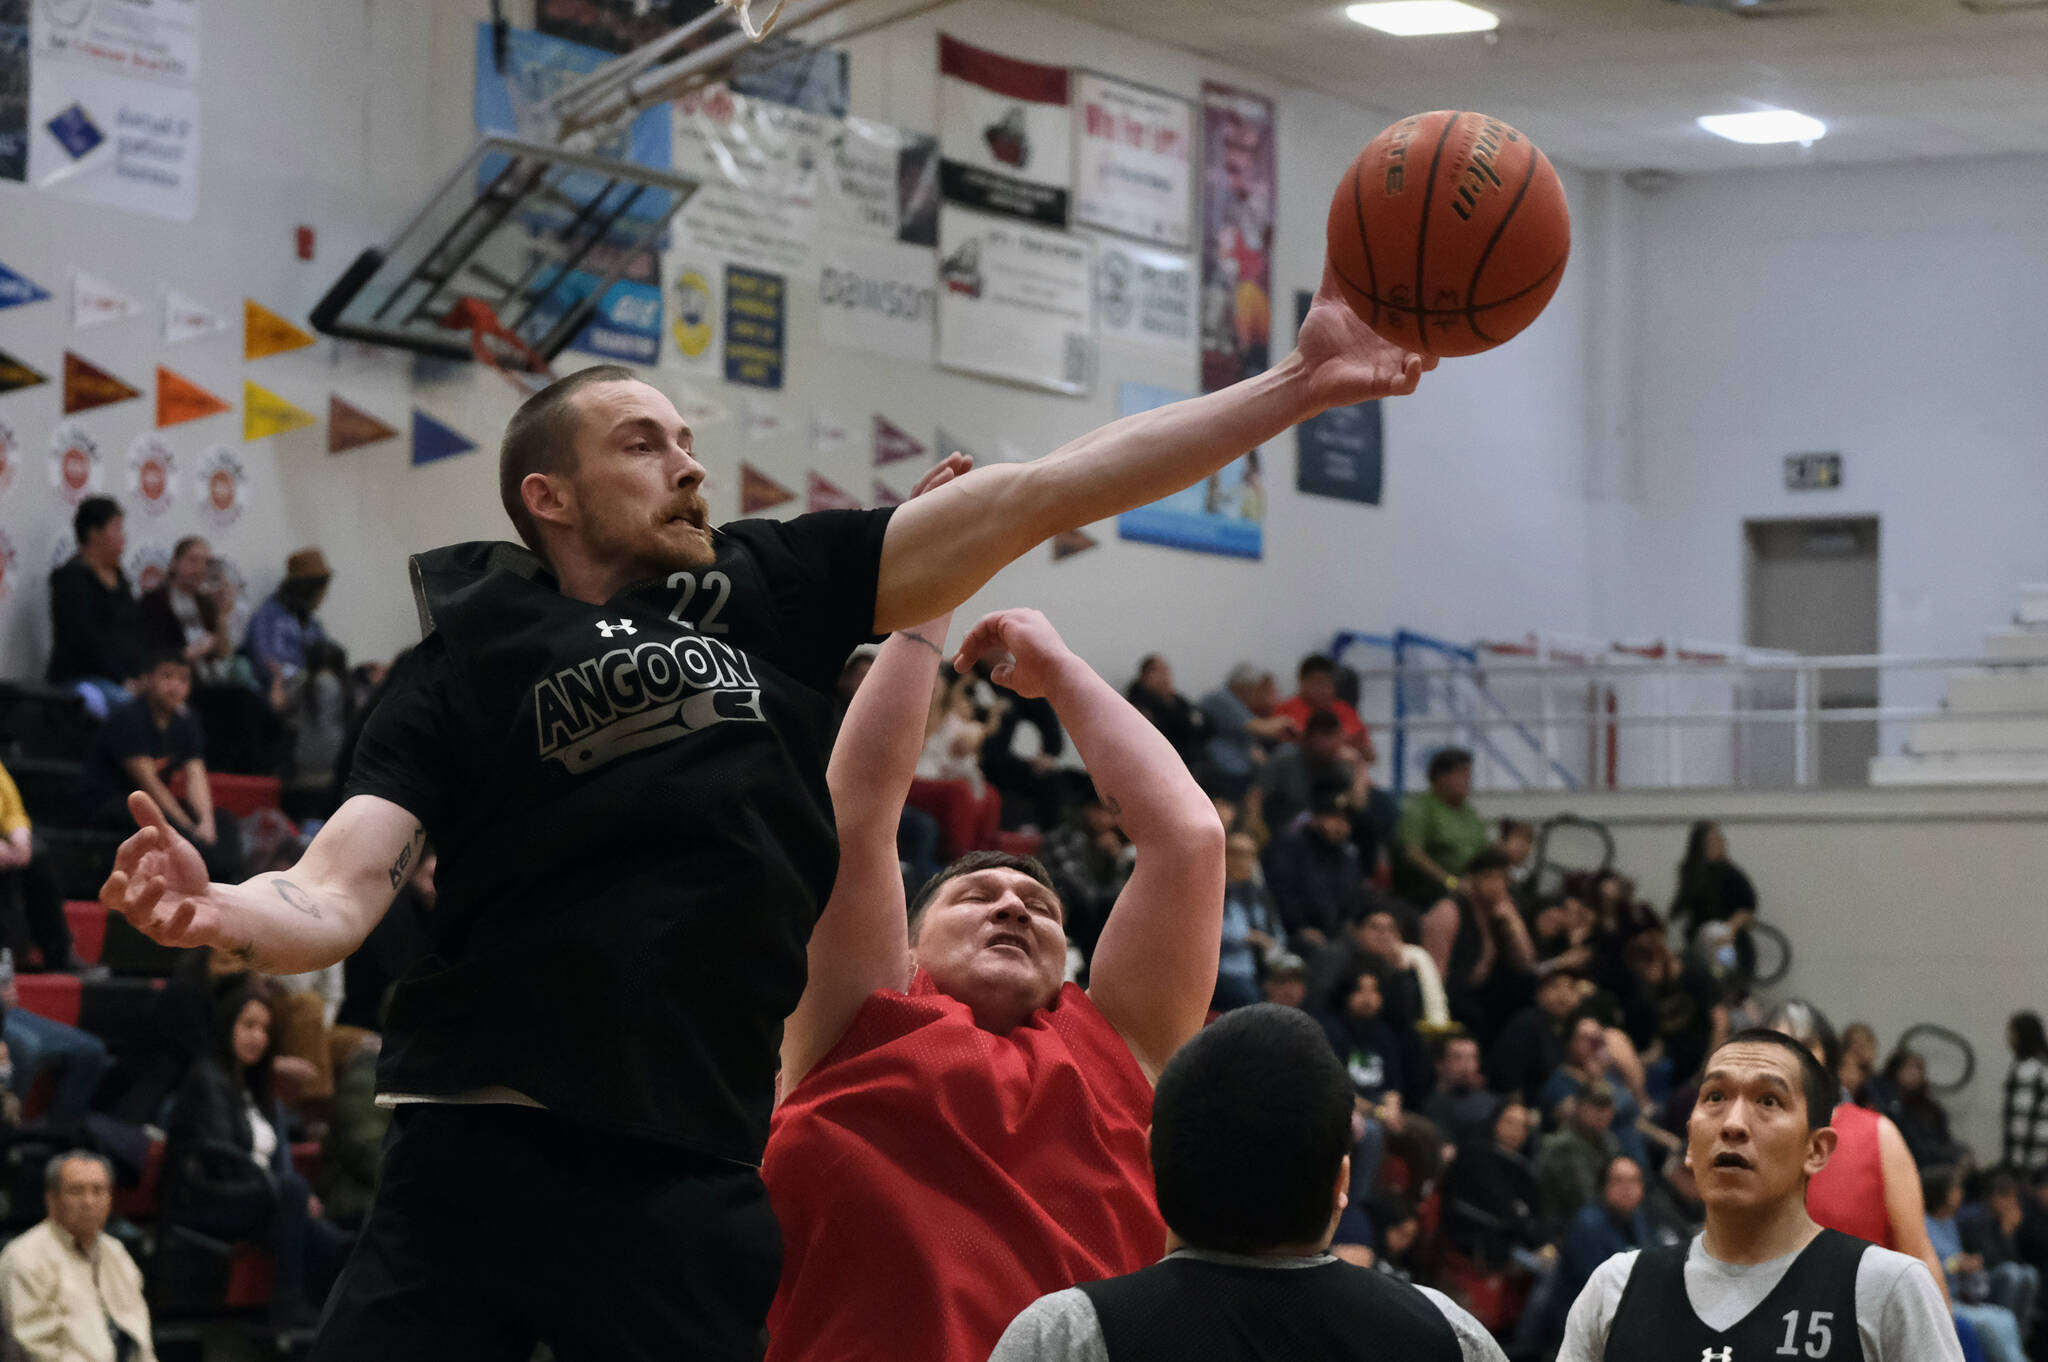 Angoon’s Ivan Raney (22) reaches for a rebound over Kake’s Jess Ross during C Bracket action in the Gold Medal Basketball Tournament, Tuesday, March 21, at Juneau-Douglas High School: Yadaa.at Kalé. (Klas Stolpe/For the Juneau Empire)